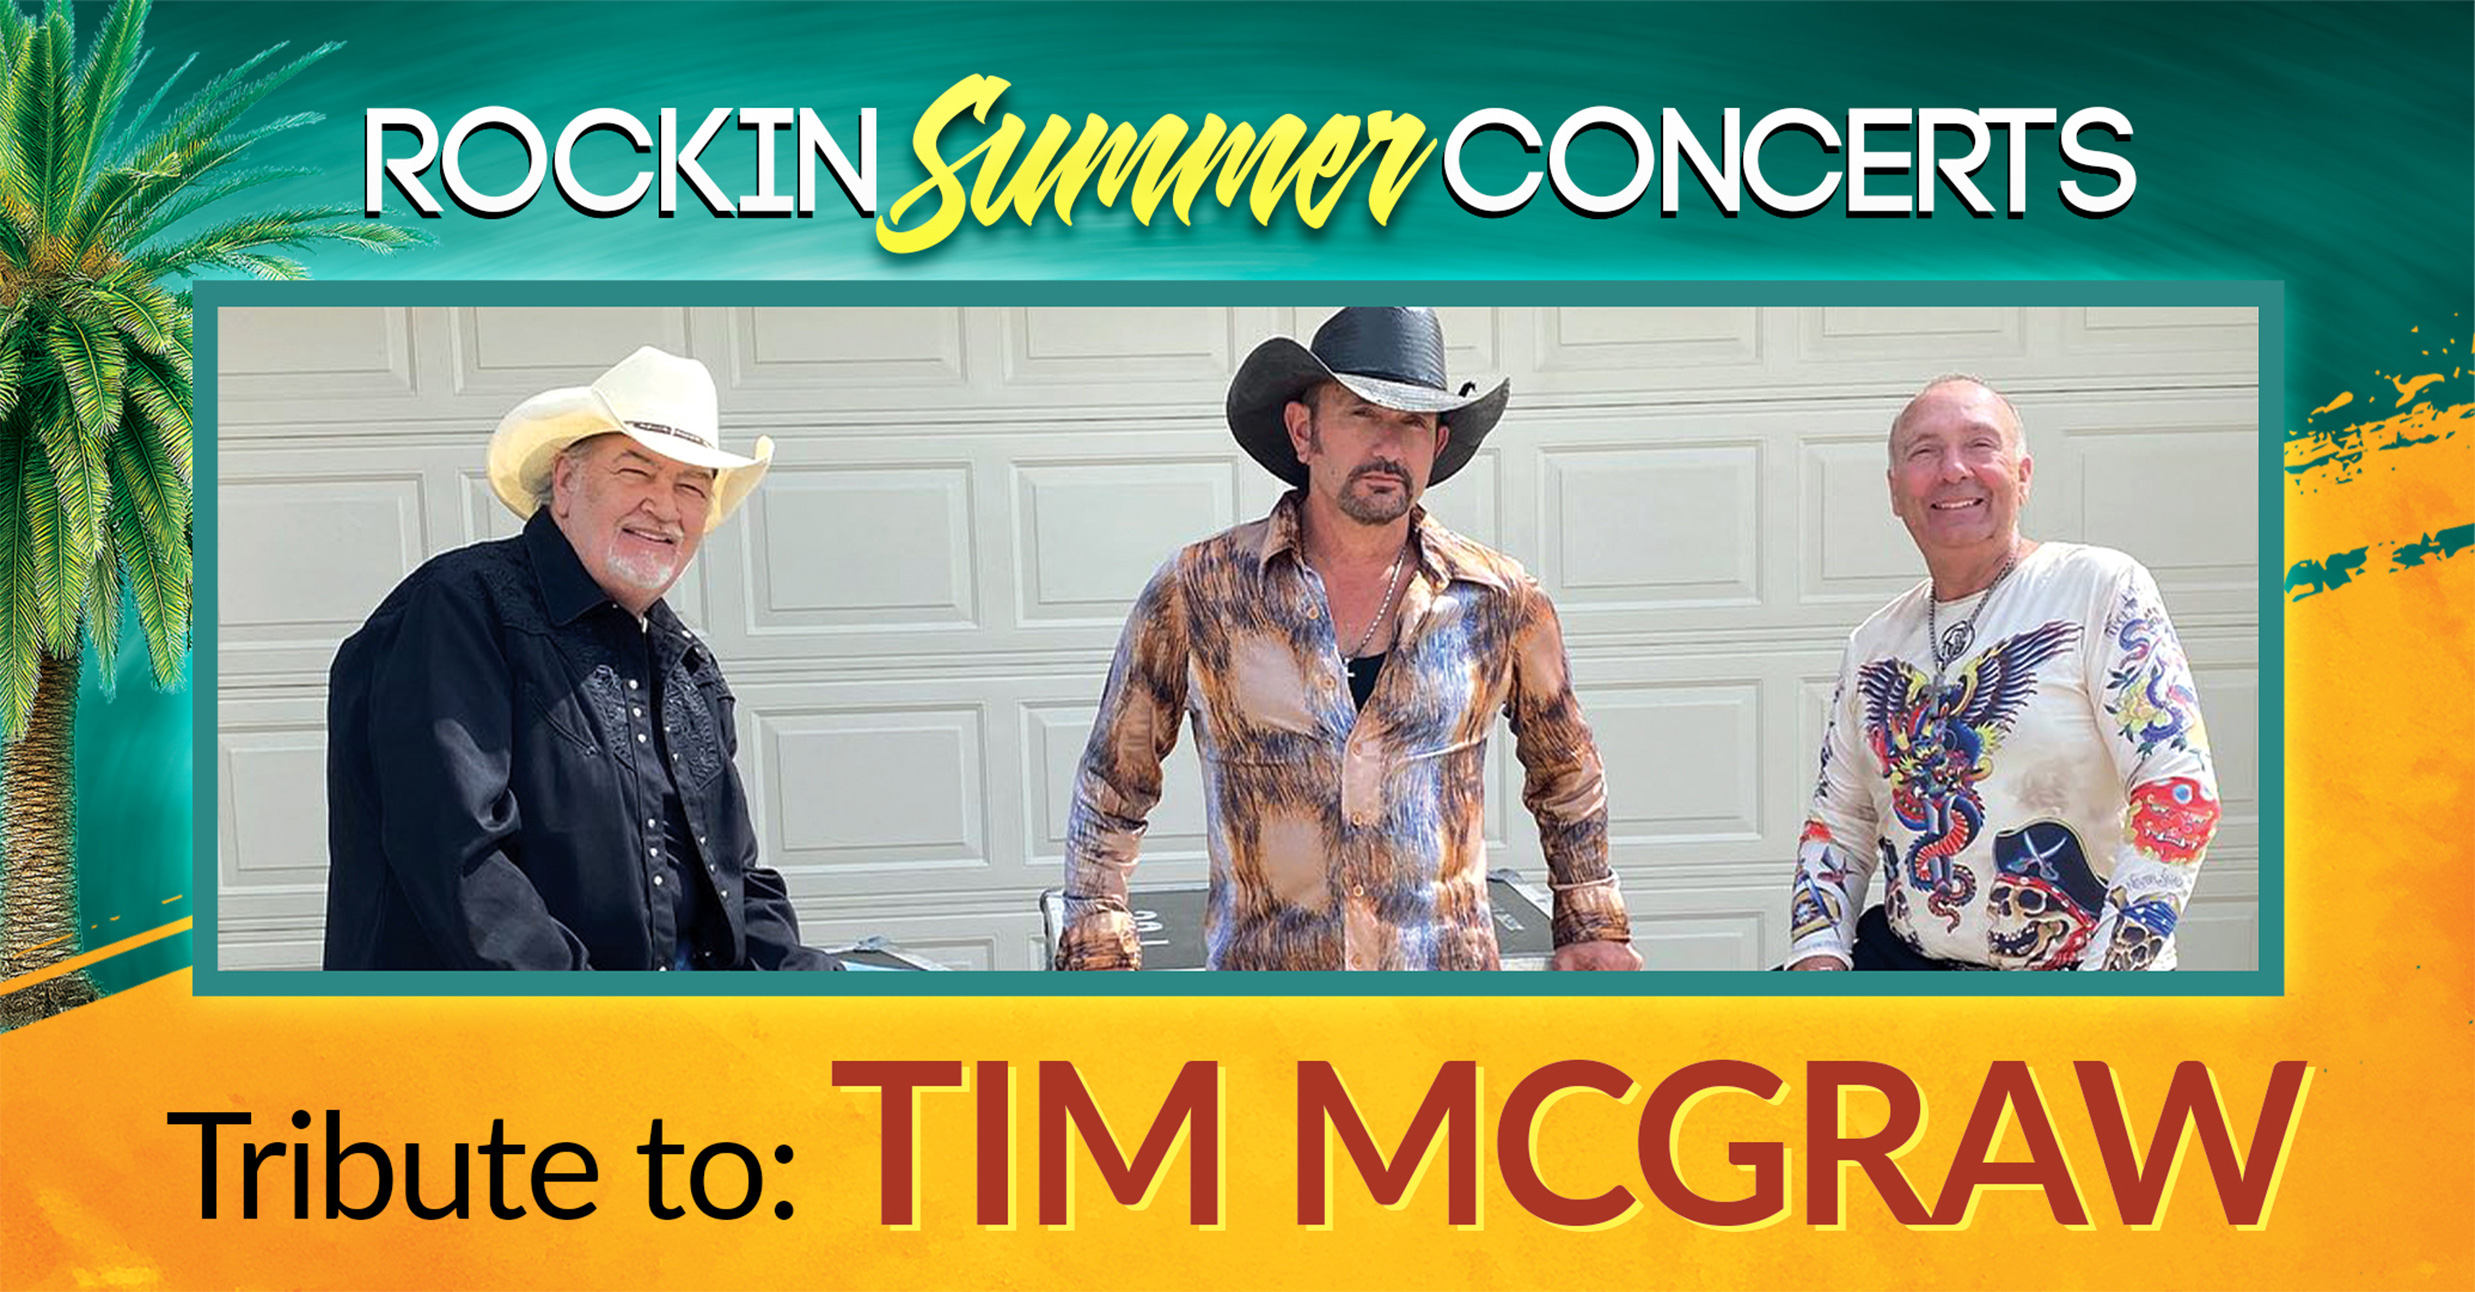 CANCELED EVENT! TIM MCGRAW Tribute – Rockin Summer Concerts – The